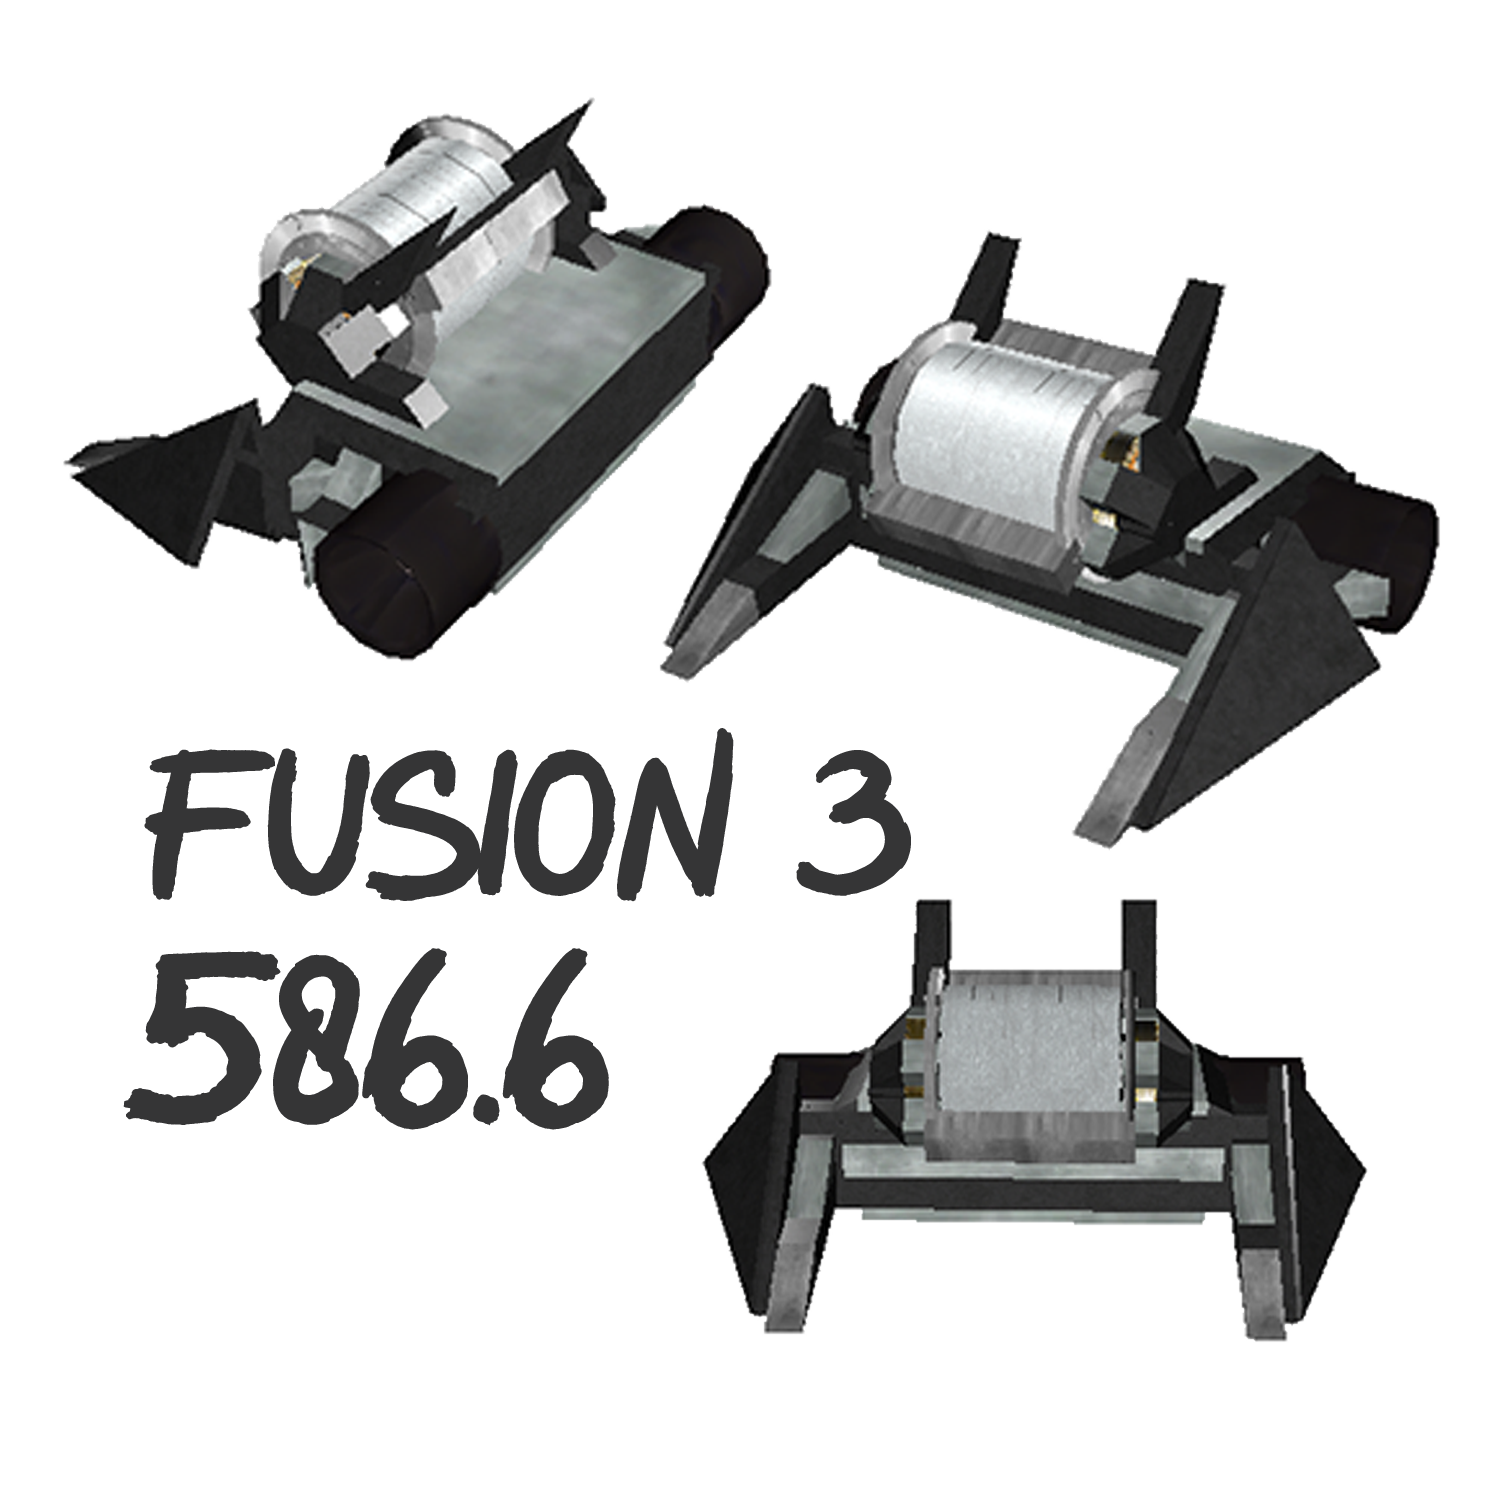 Fusion 3.png